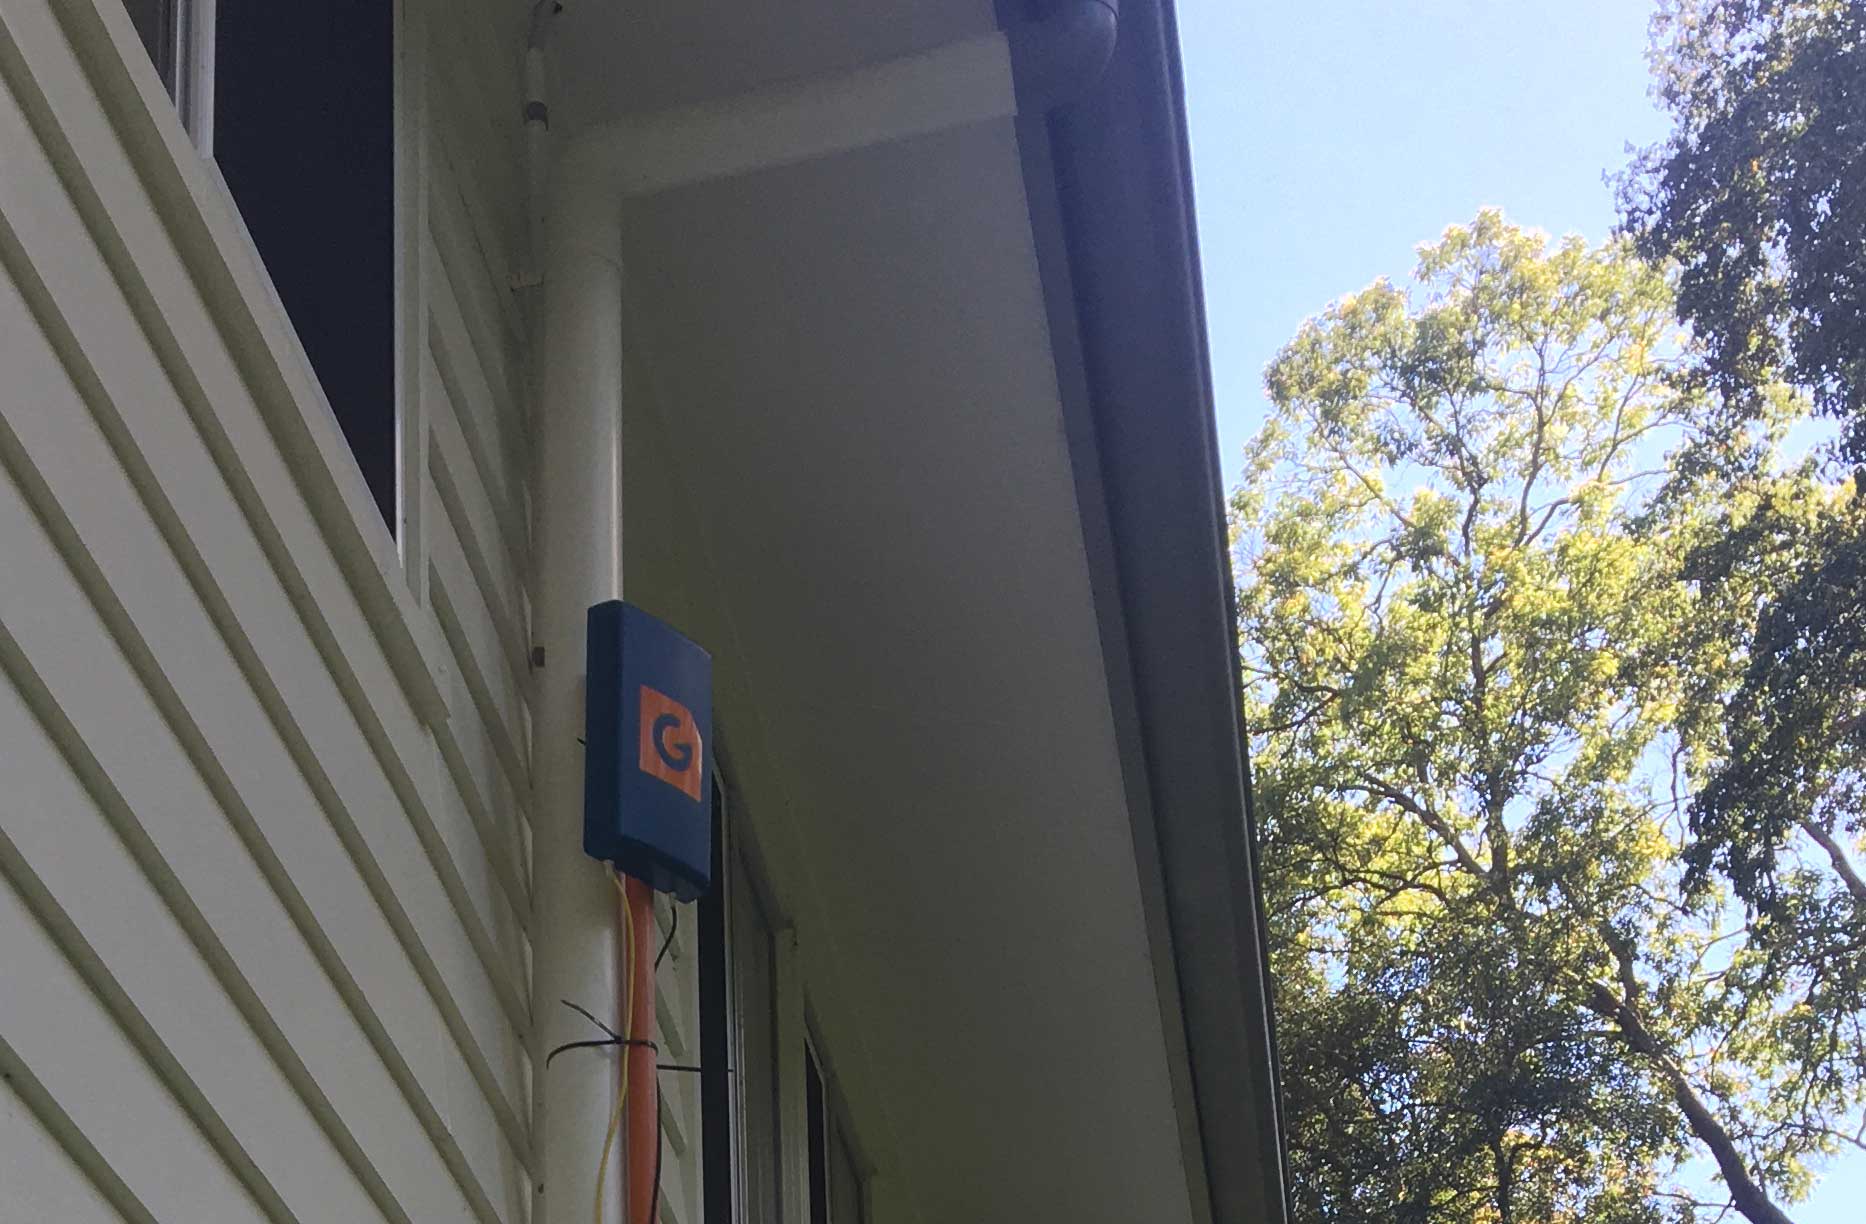 Optus 4G internet signal increase and super fast internet with True Blue G Spotter MiMo antenna into Optus B818 Modem